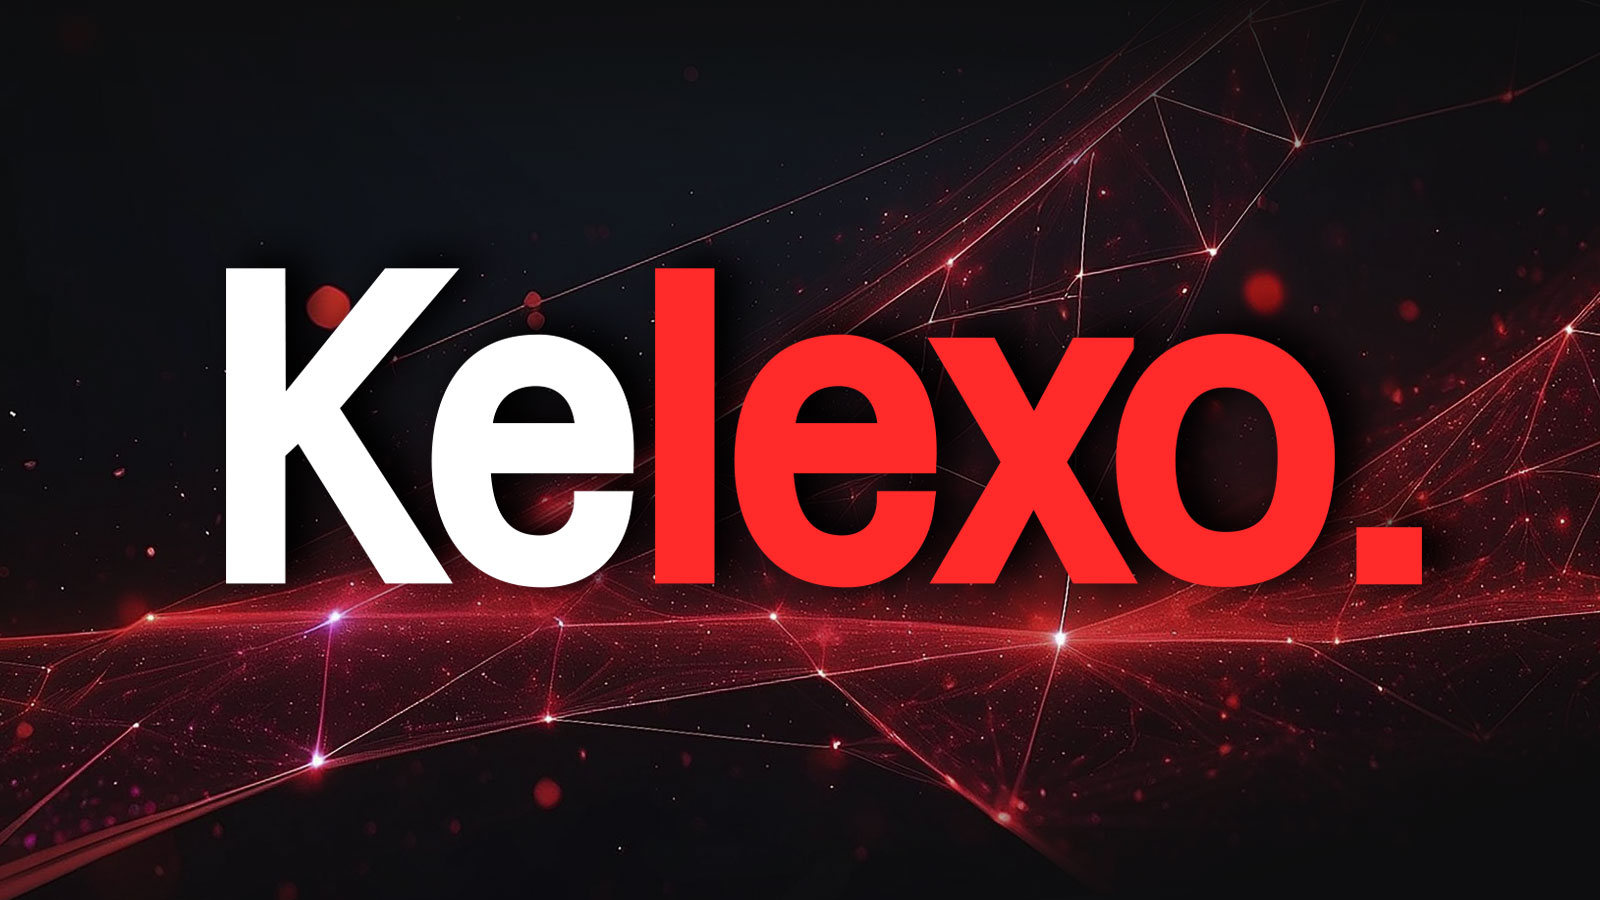 Kelexo (KLXO) Token Release Might be Considered by Altcoiners in March since Ethereum (ETH) and Cardano (ADA) Top Altcoins Recover Fast